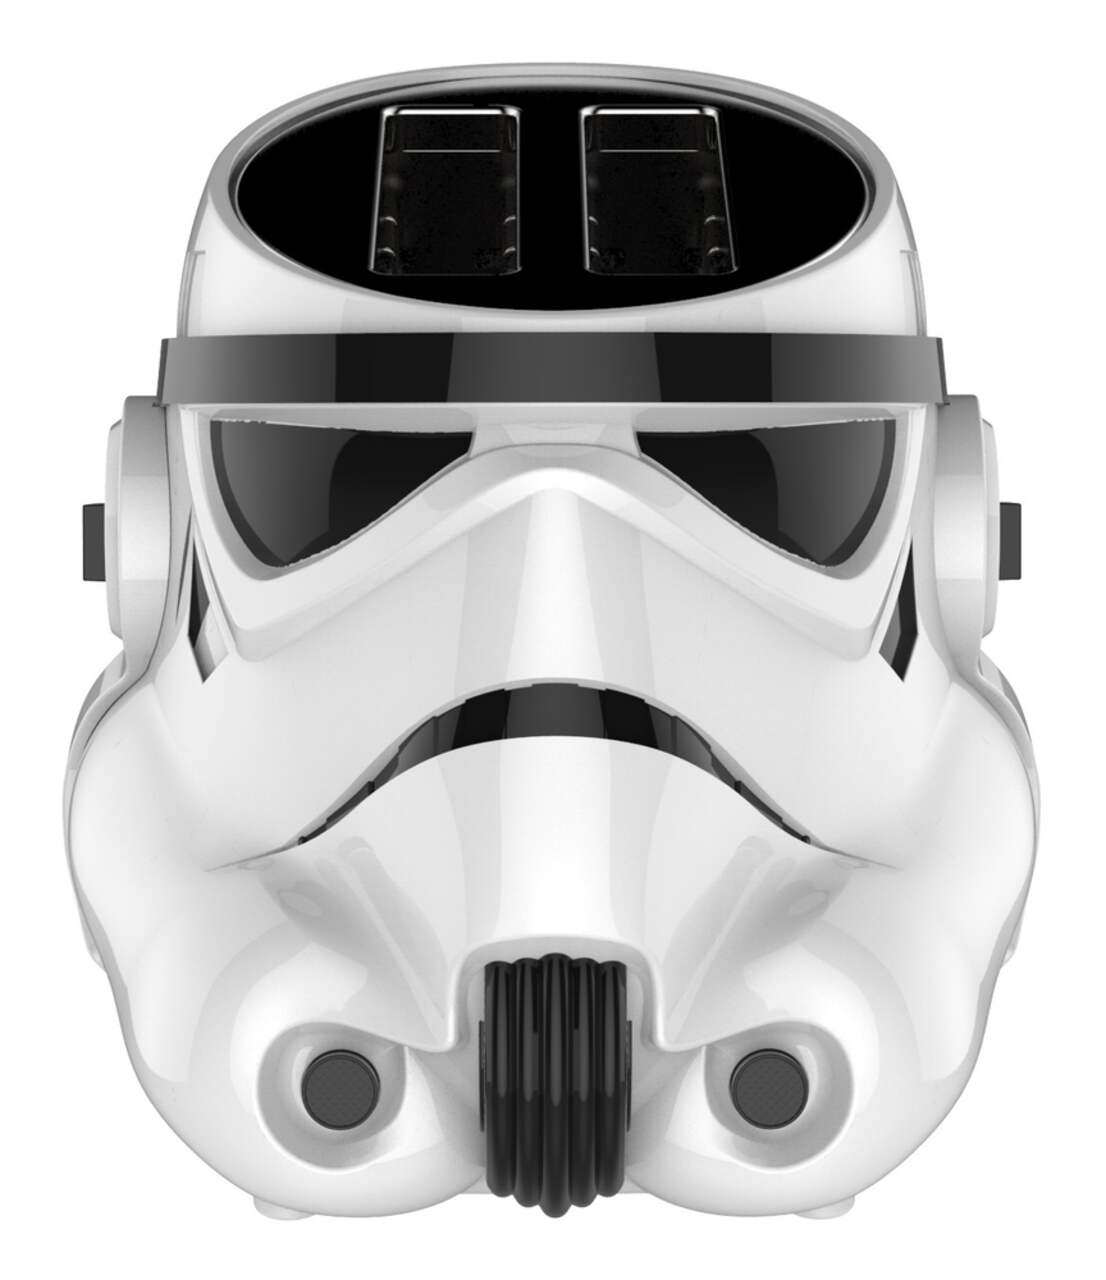 Grille-pain Star Wars Stormtrooper, 2 tranches